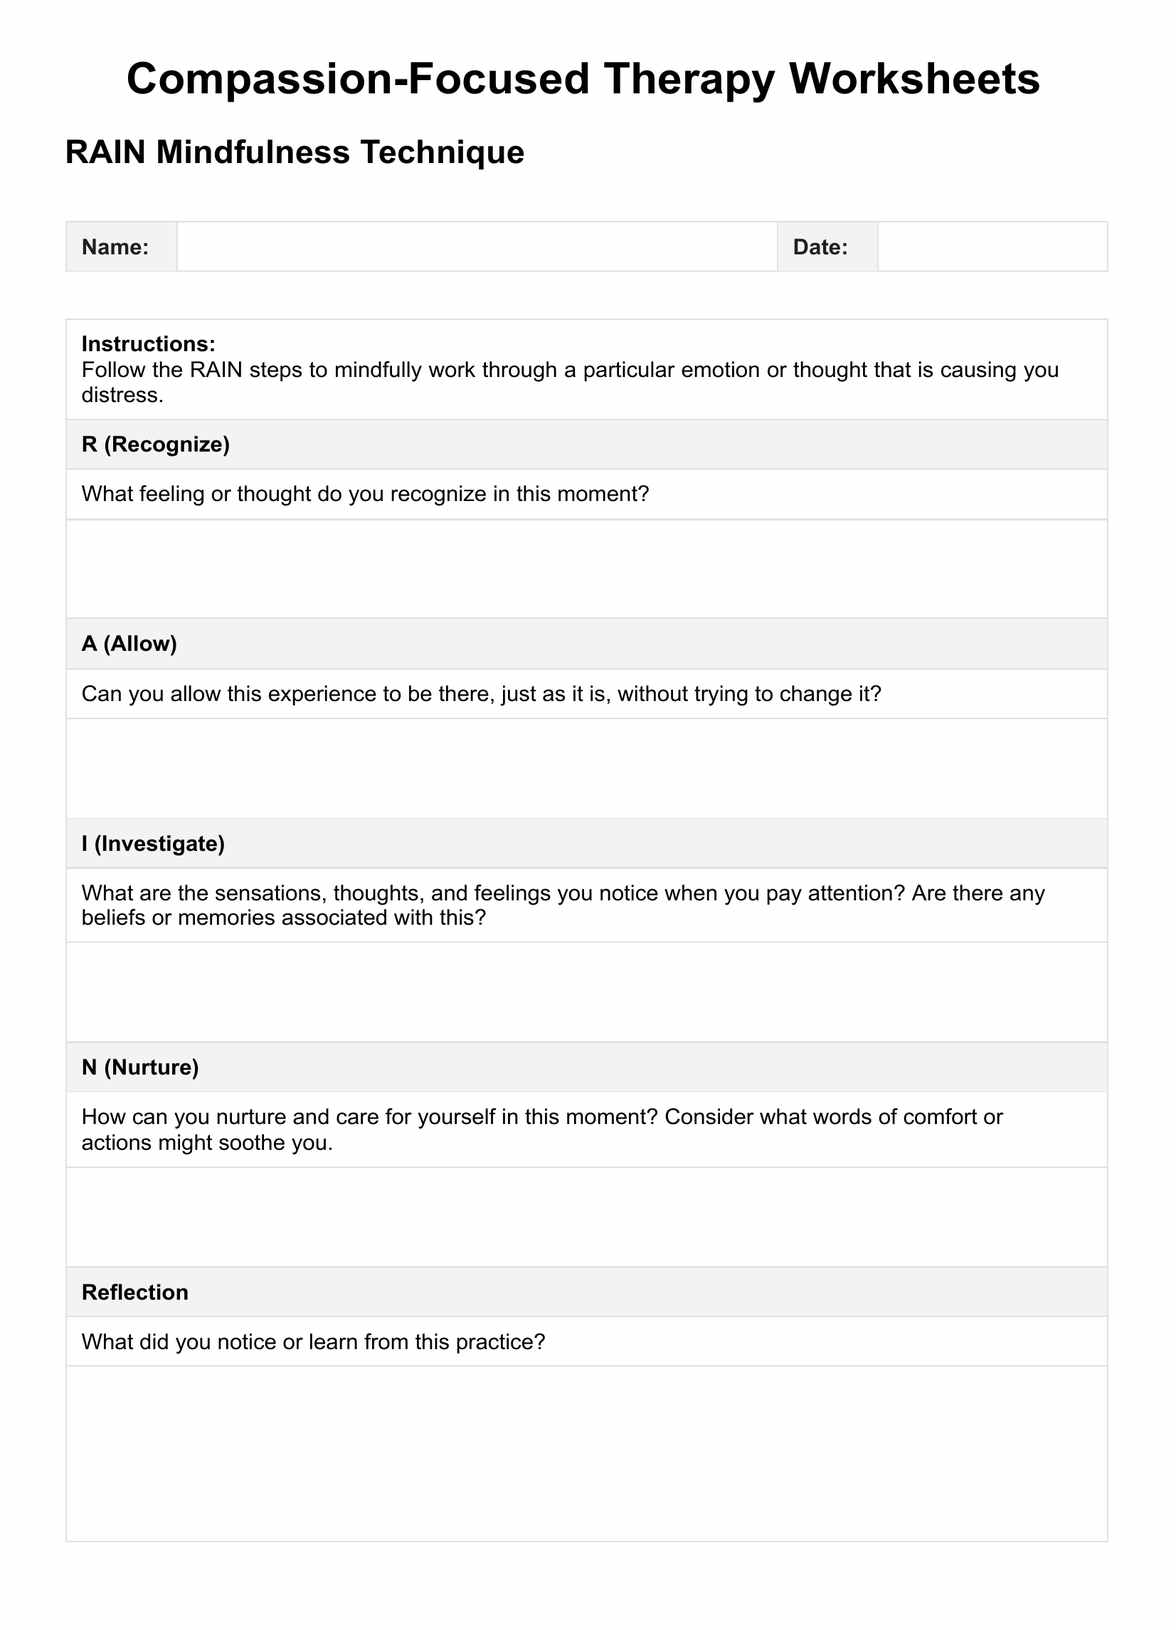 Compassion-Focused Therapy Worksheets PDF Example